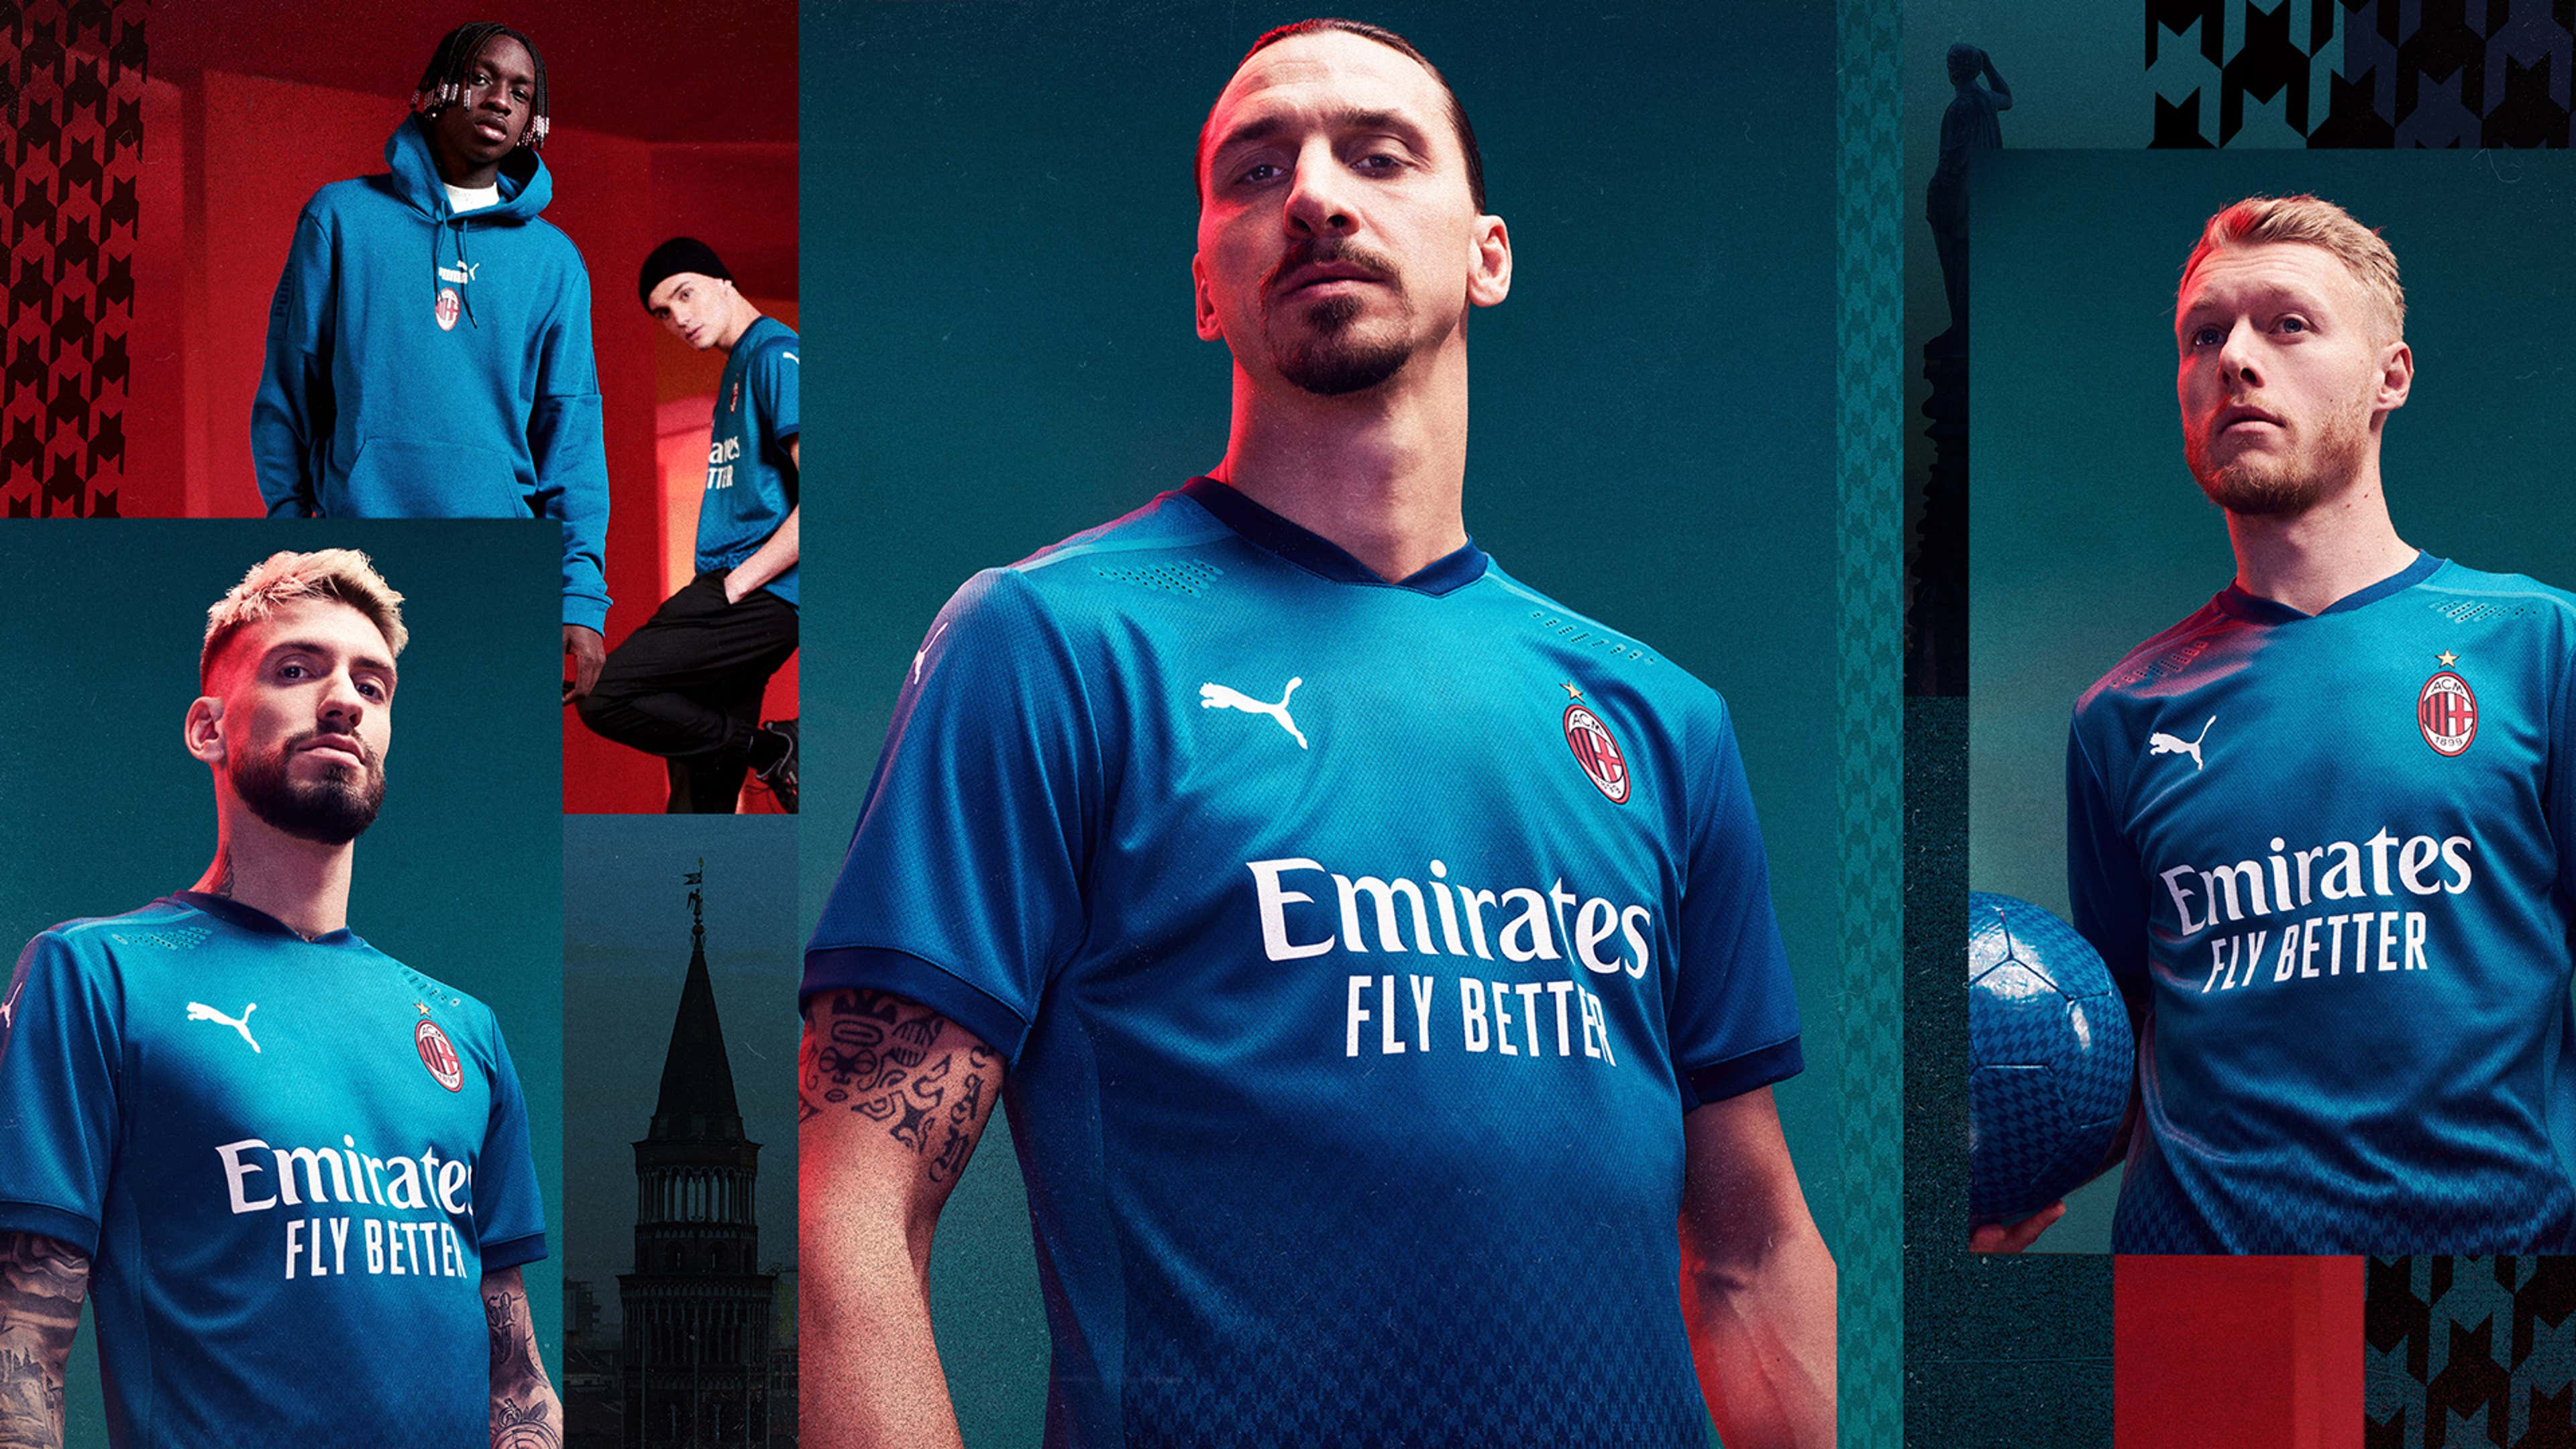 New Ajax Away Kit 2020-21, Adidas unveil blue alternate jersey for  Amsterdam outfit